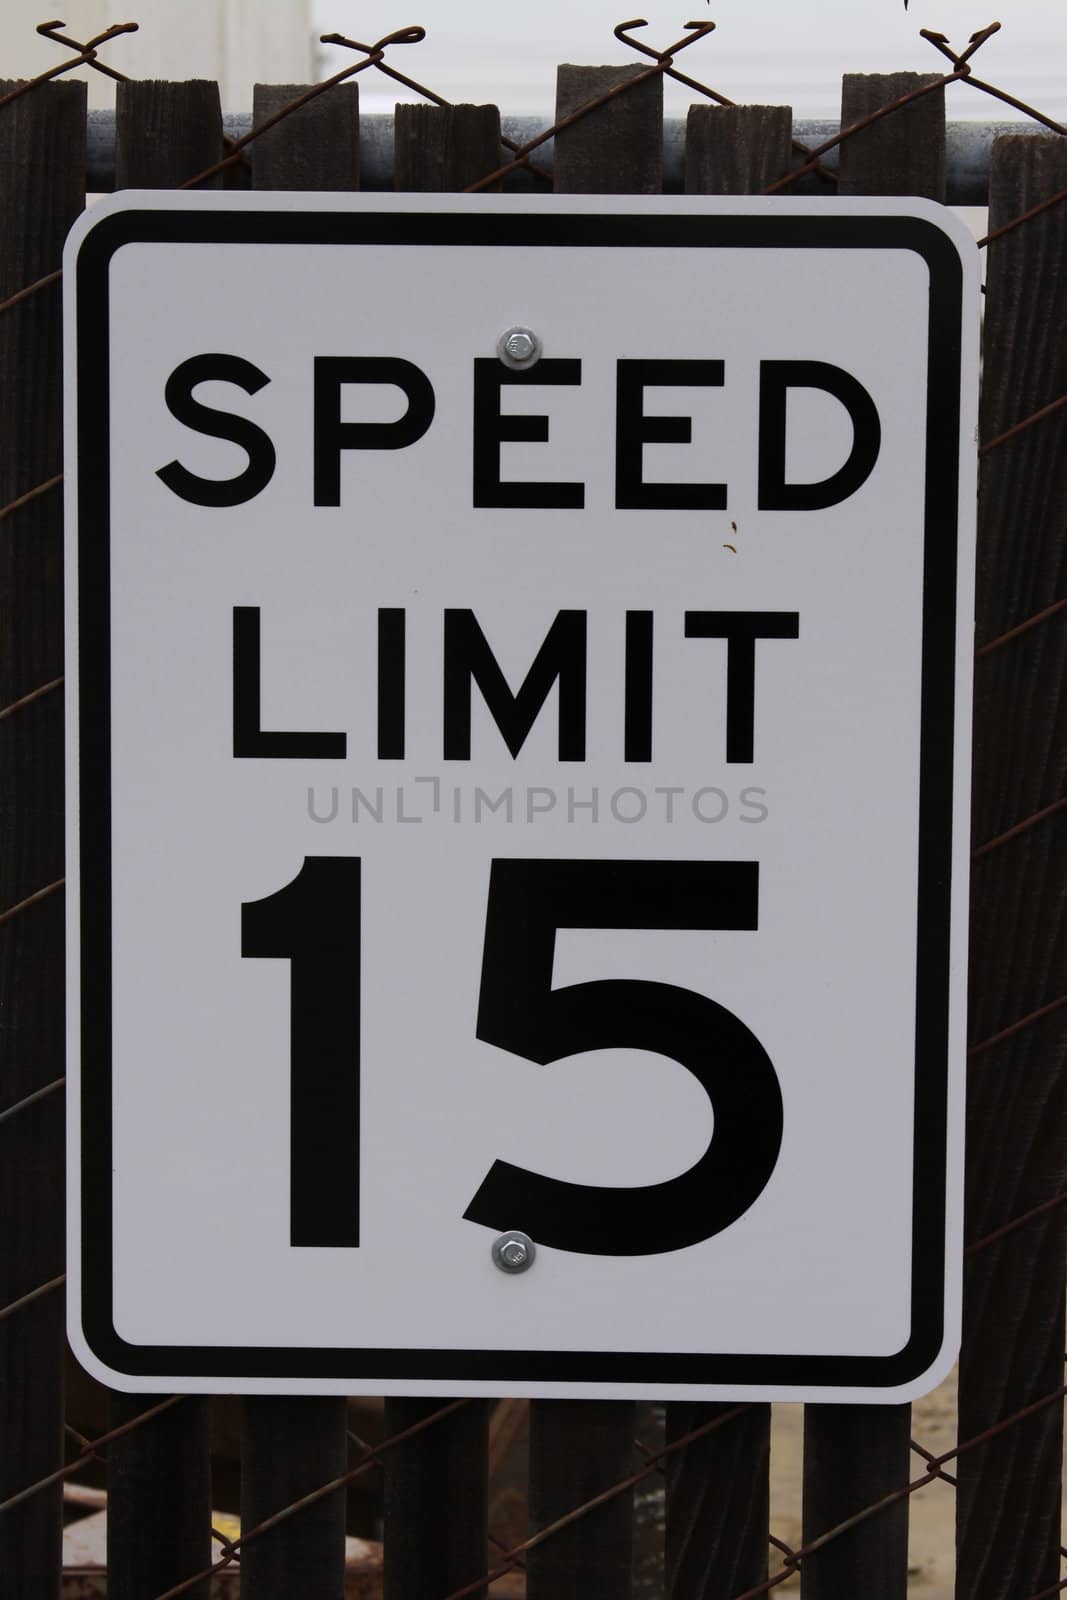 Speed limit road sign close up.